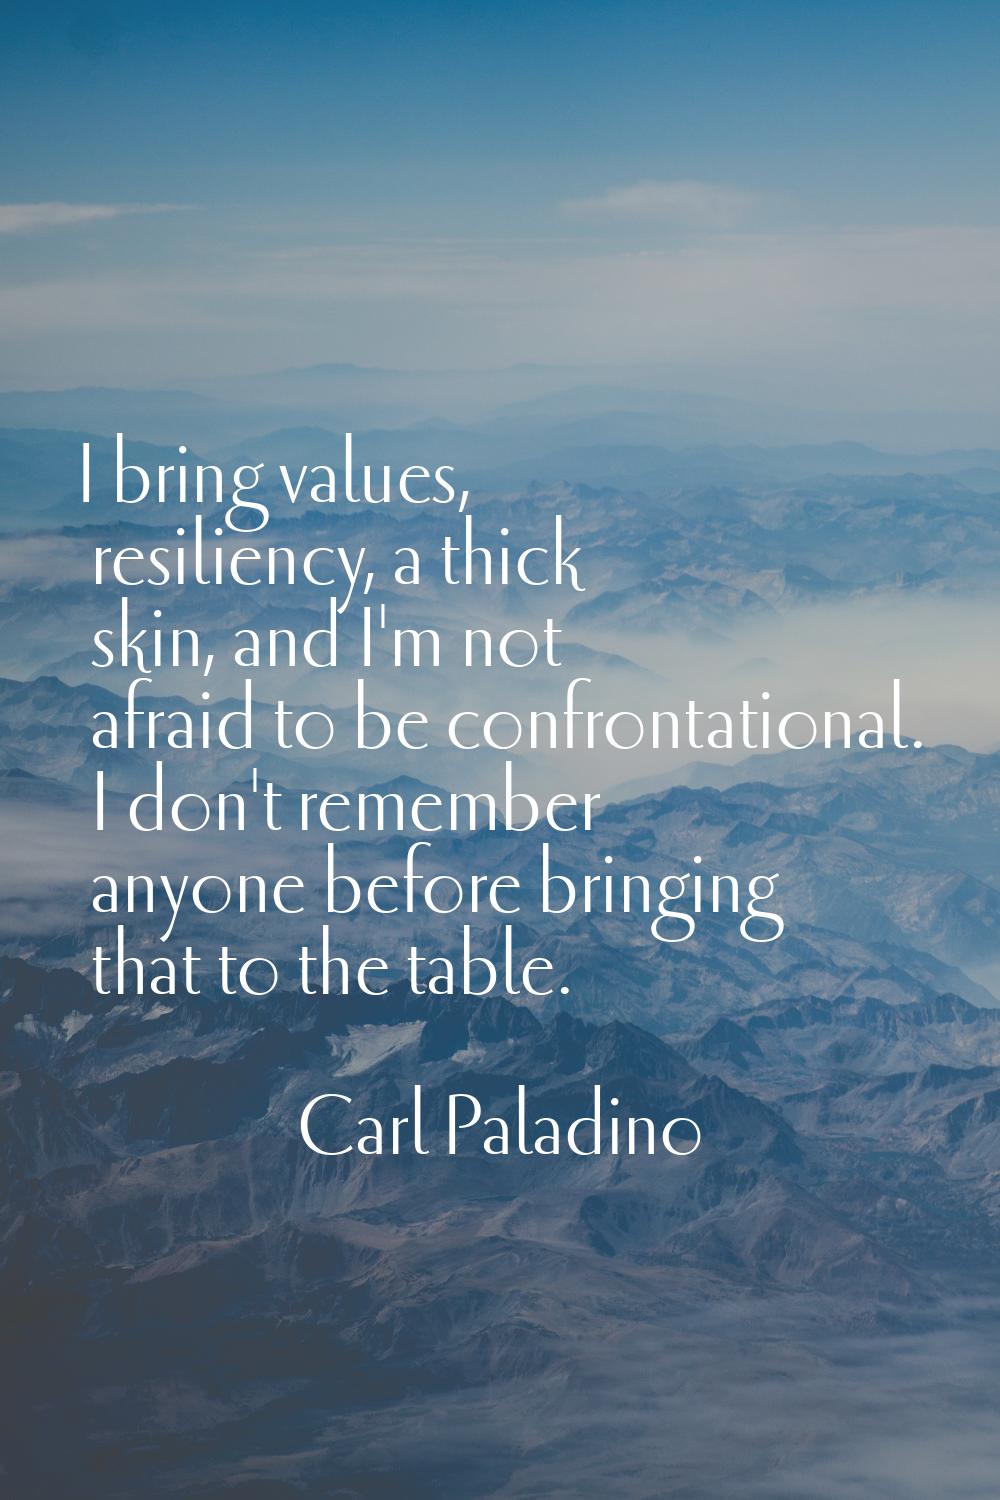 I bring values, resiliency, a thick skin, and I'm not afraid to be confrontational. I don't remembe